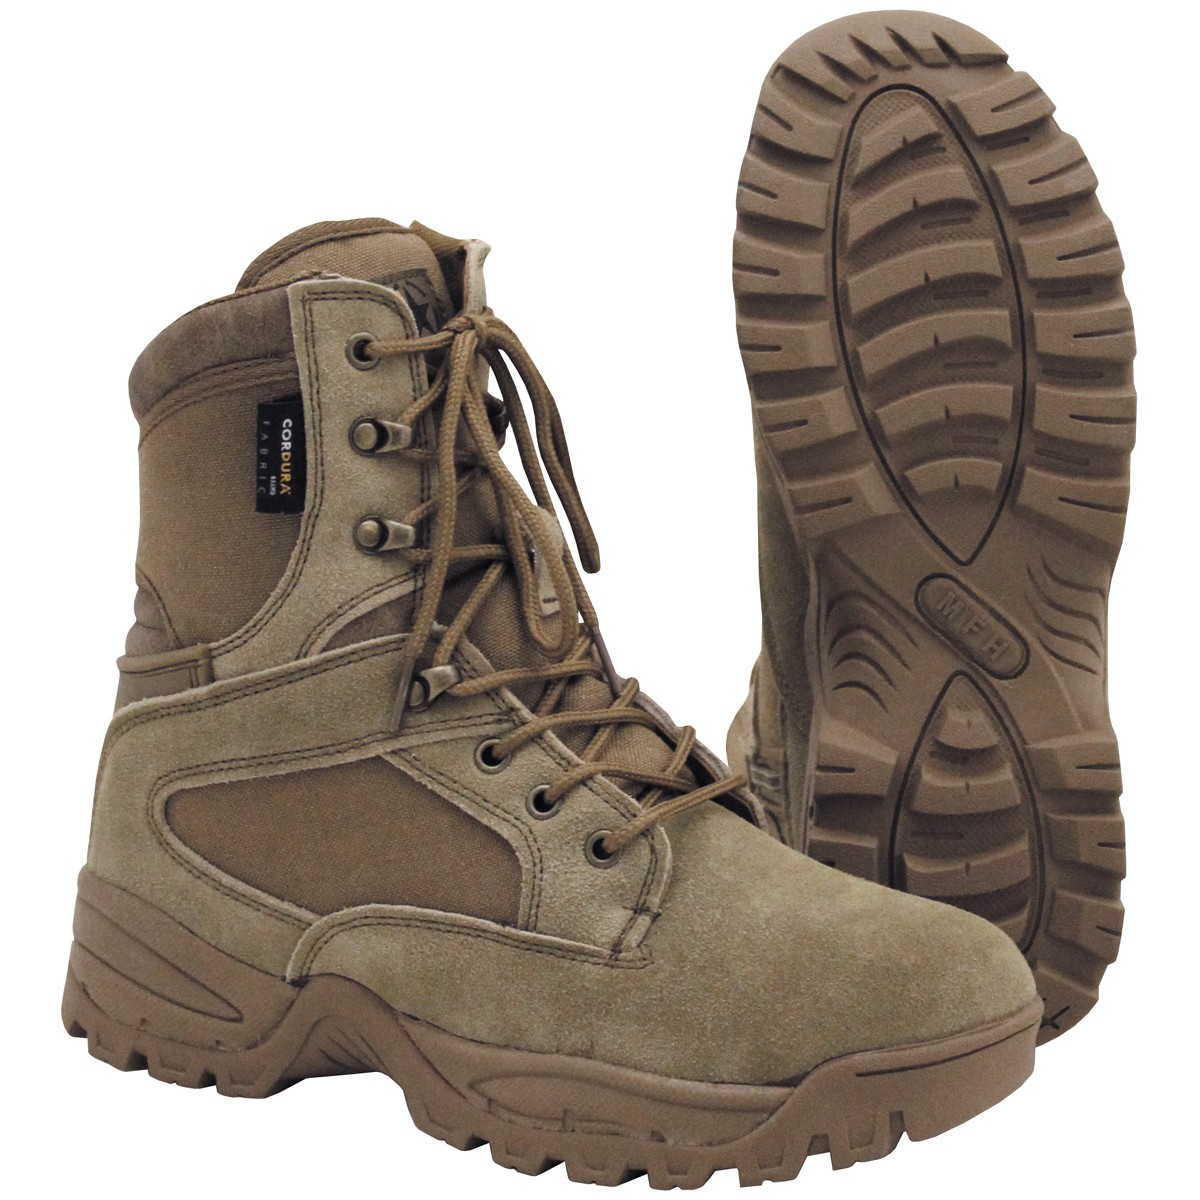 Professional Military Tactical Cordura Lined Boots "Mission" Coyote